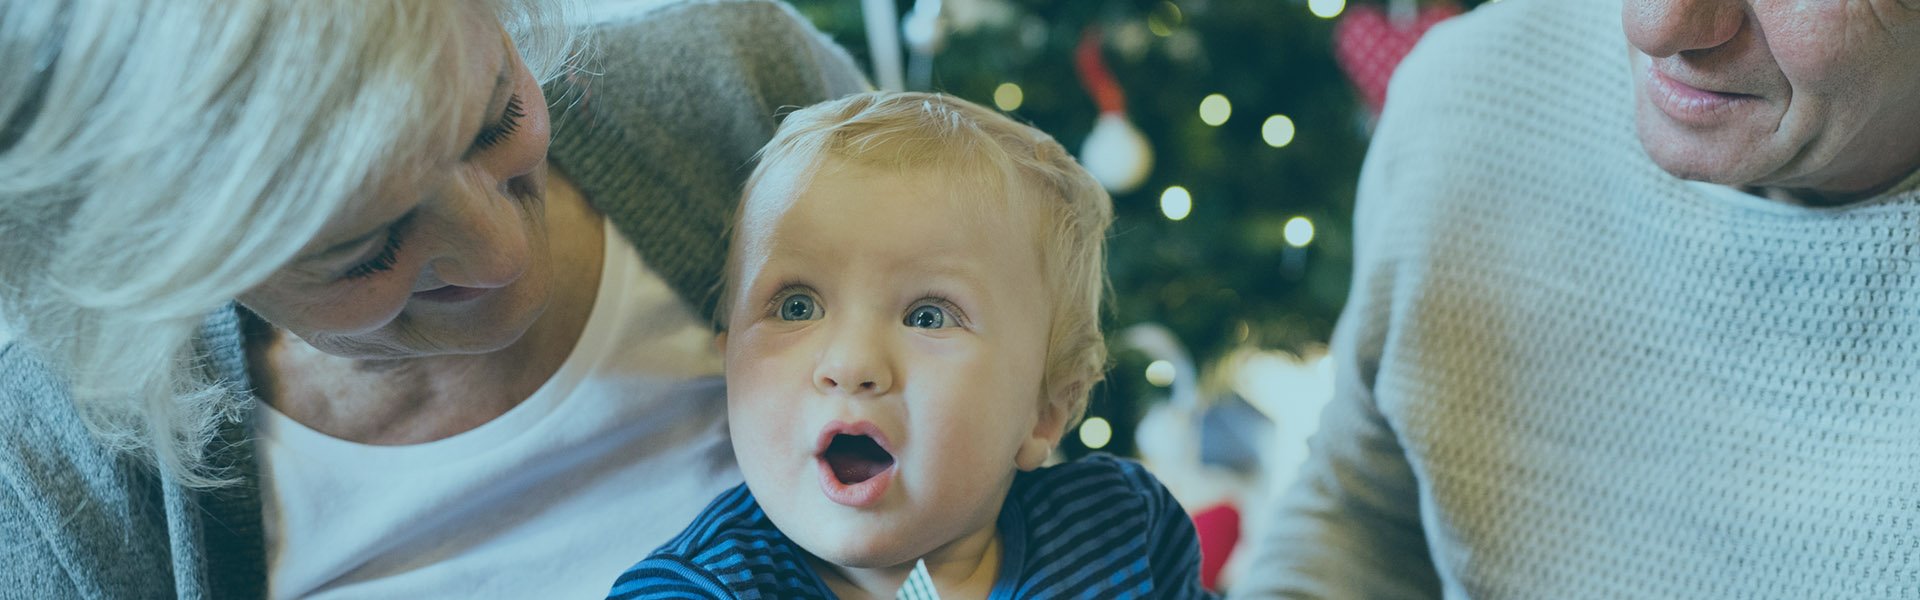 Christmas Club | Grandparents and baby at the holidays